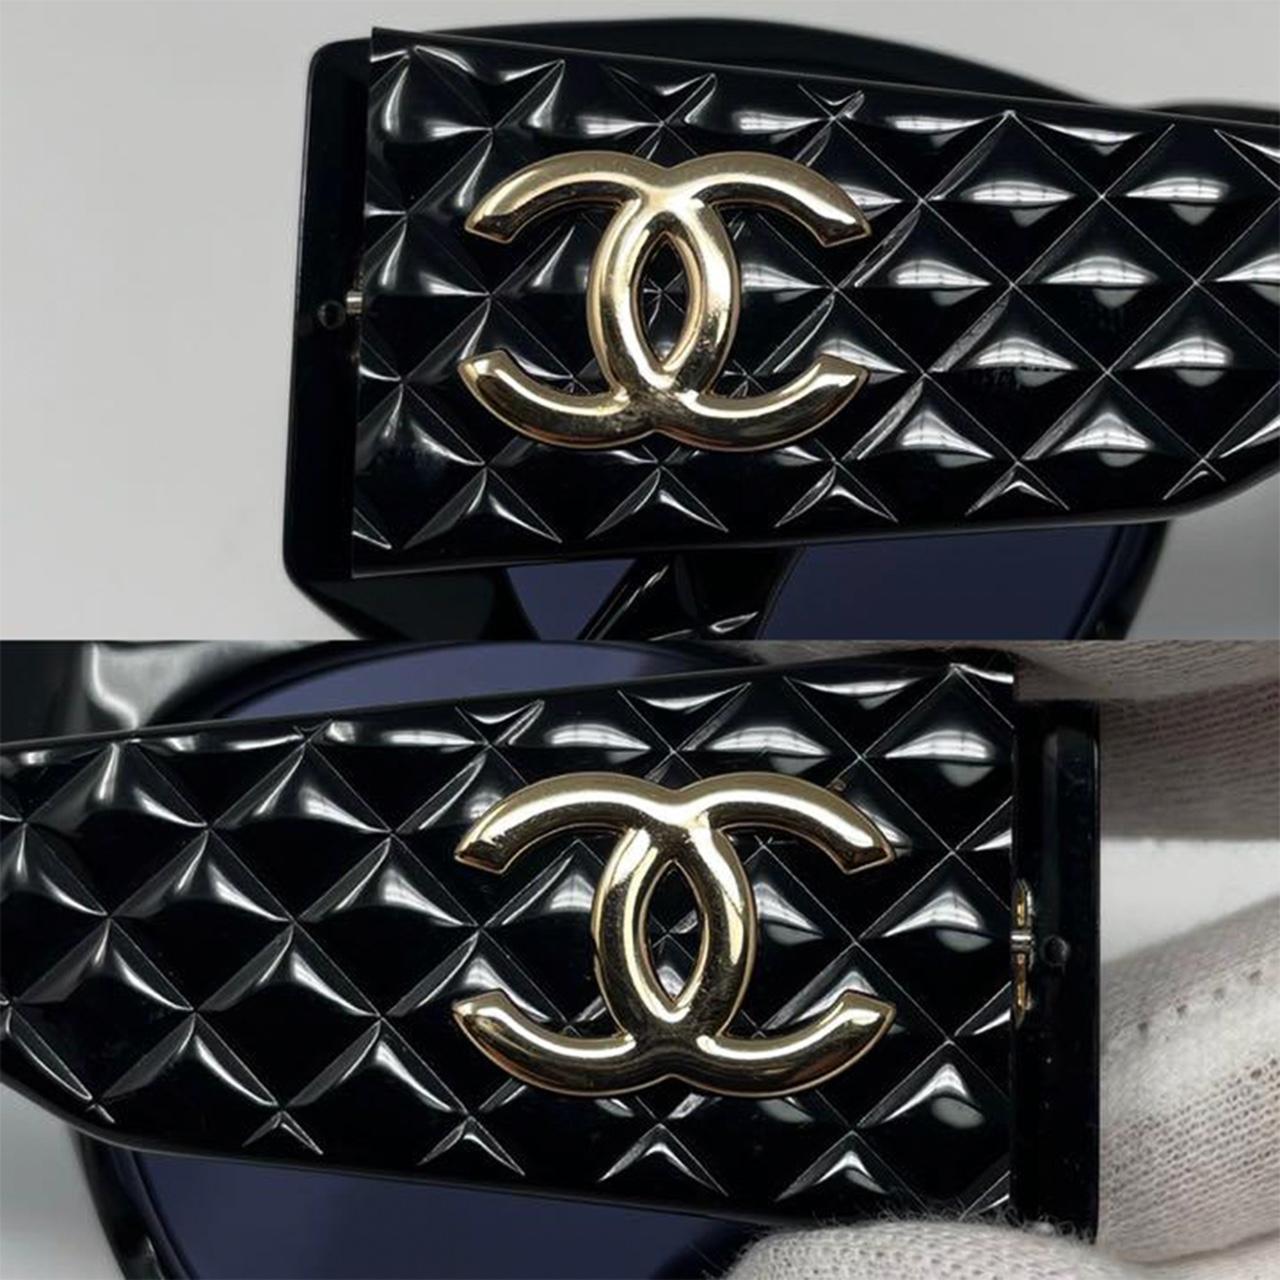 Chanel Sunglasses - Known Source